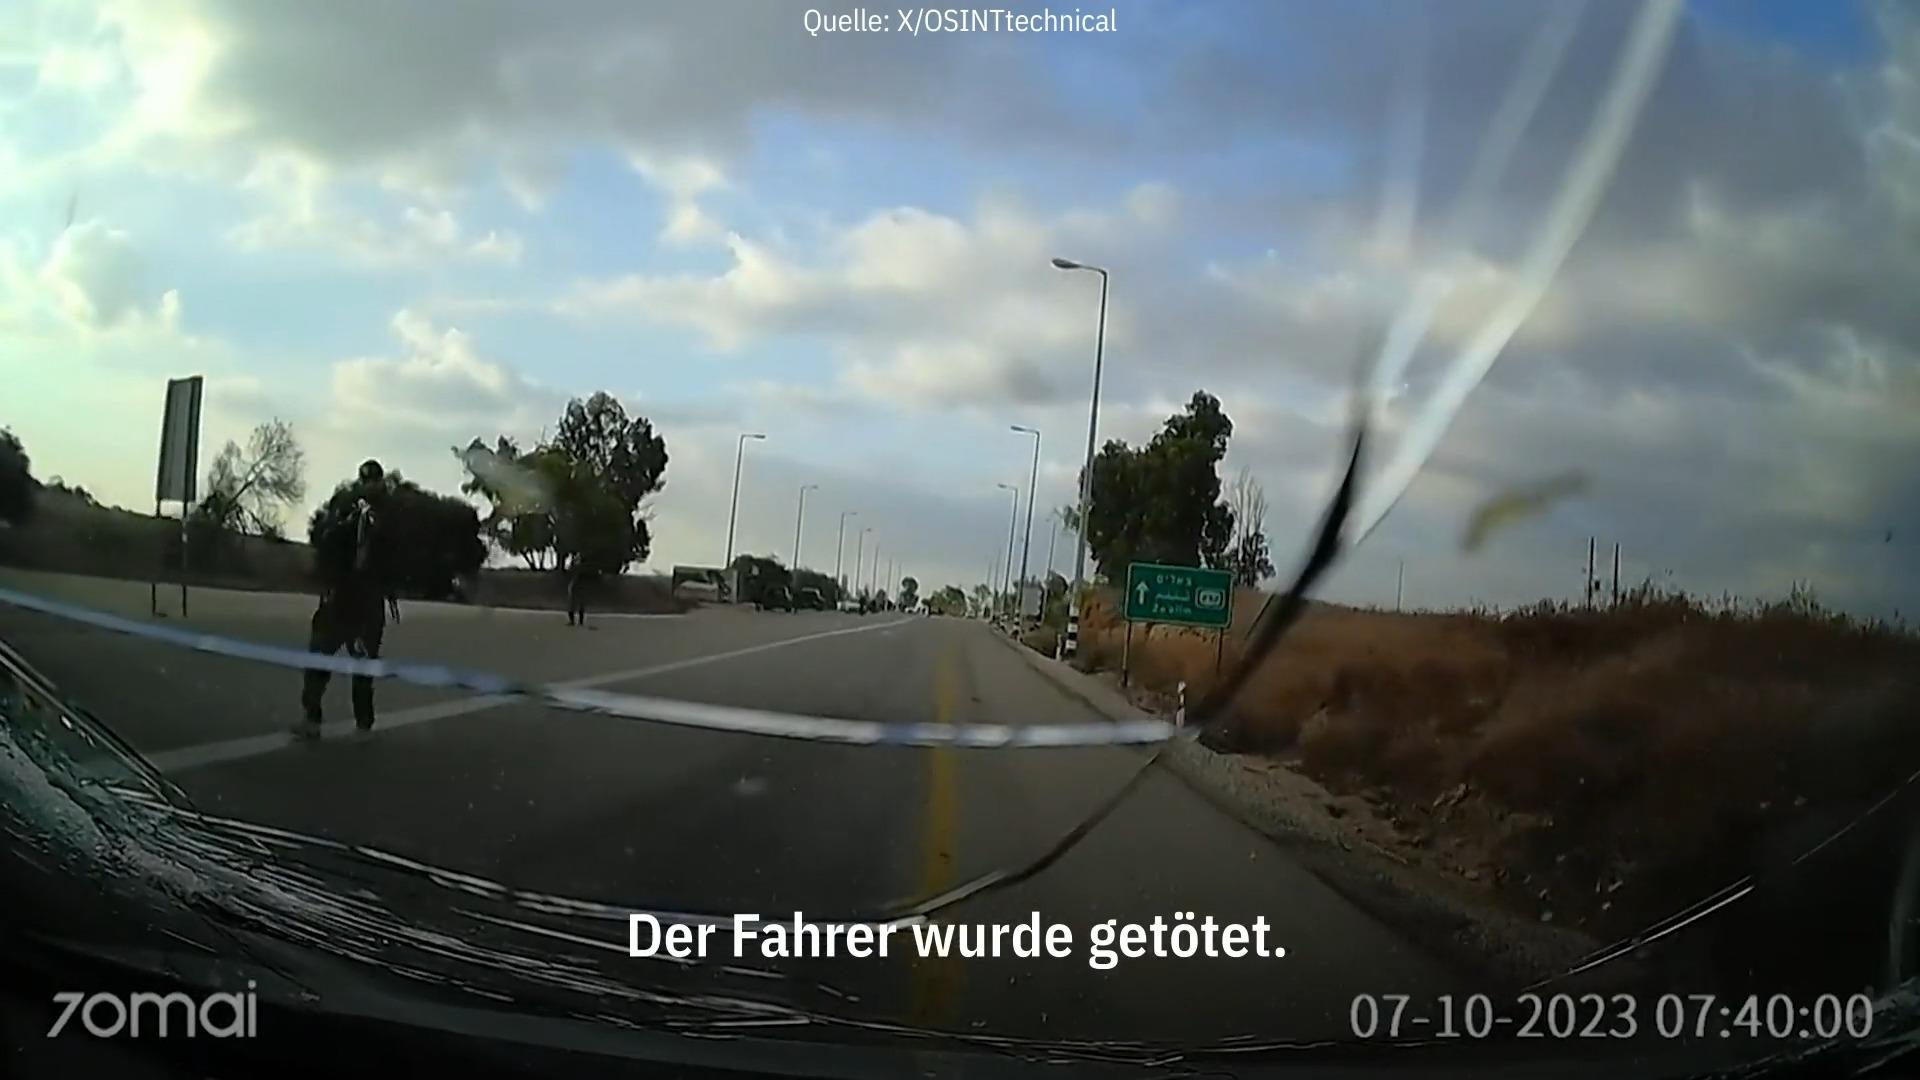 Dashcam video shows a festival-goer trying to escape, only to be killed at close range by Hamas